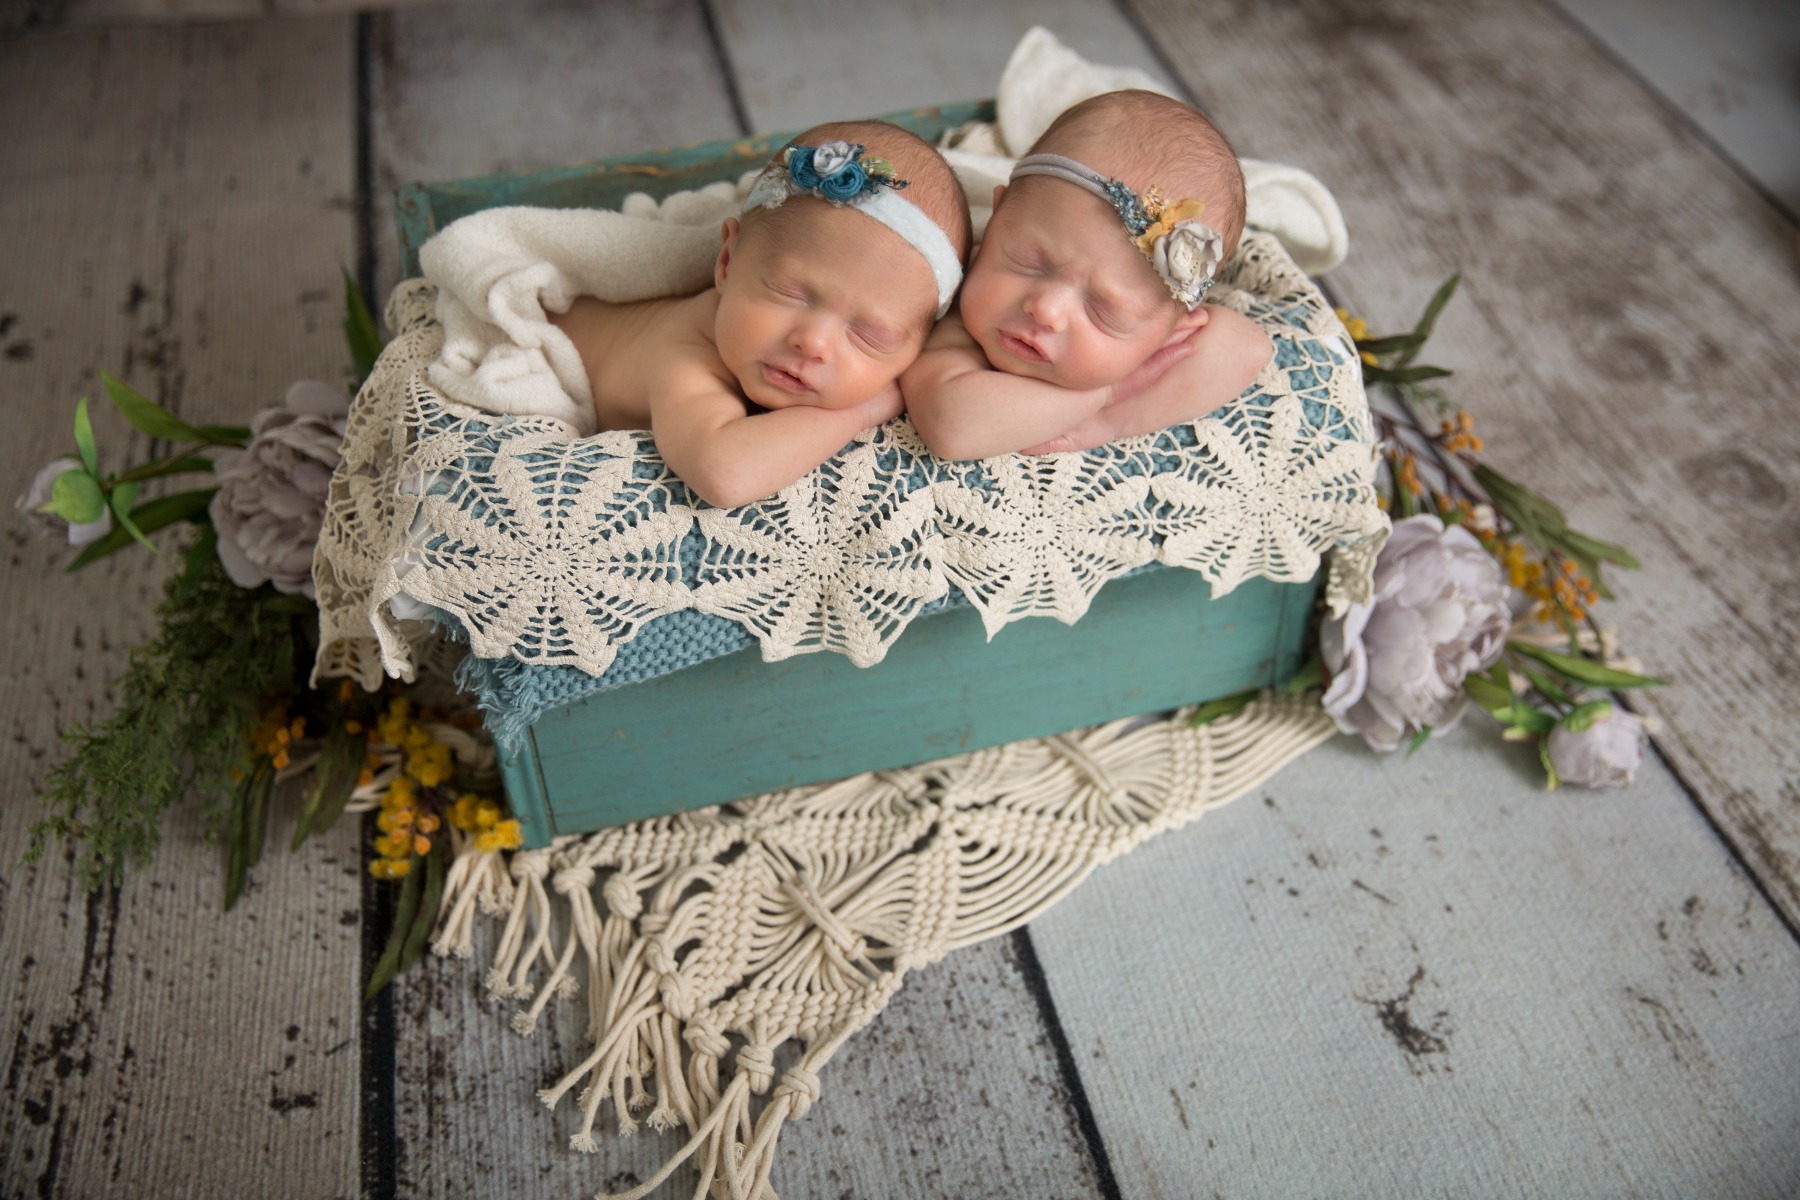 newborn twins in a blue box surrounded by flowers